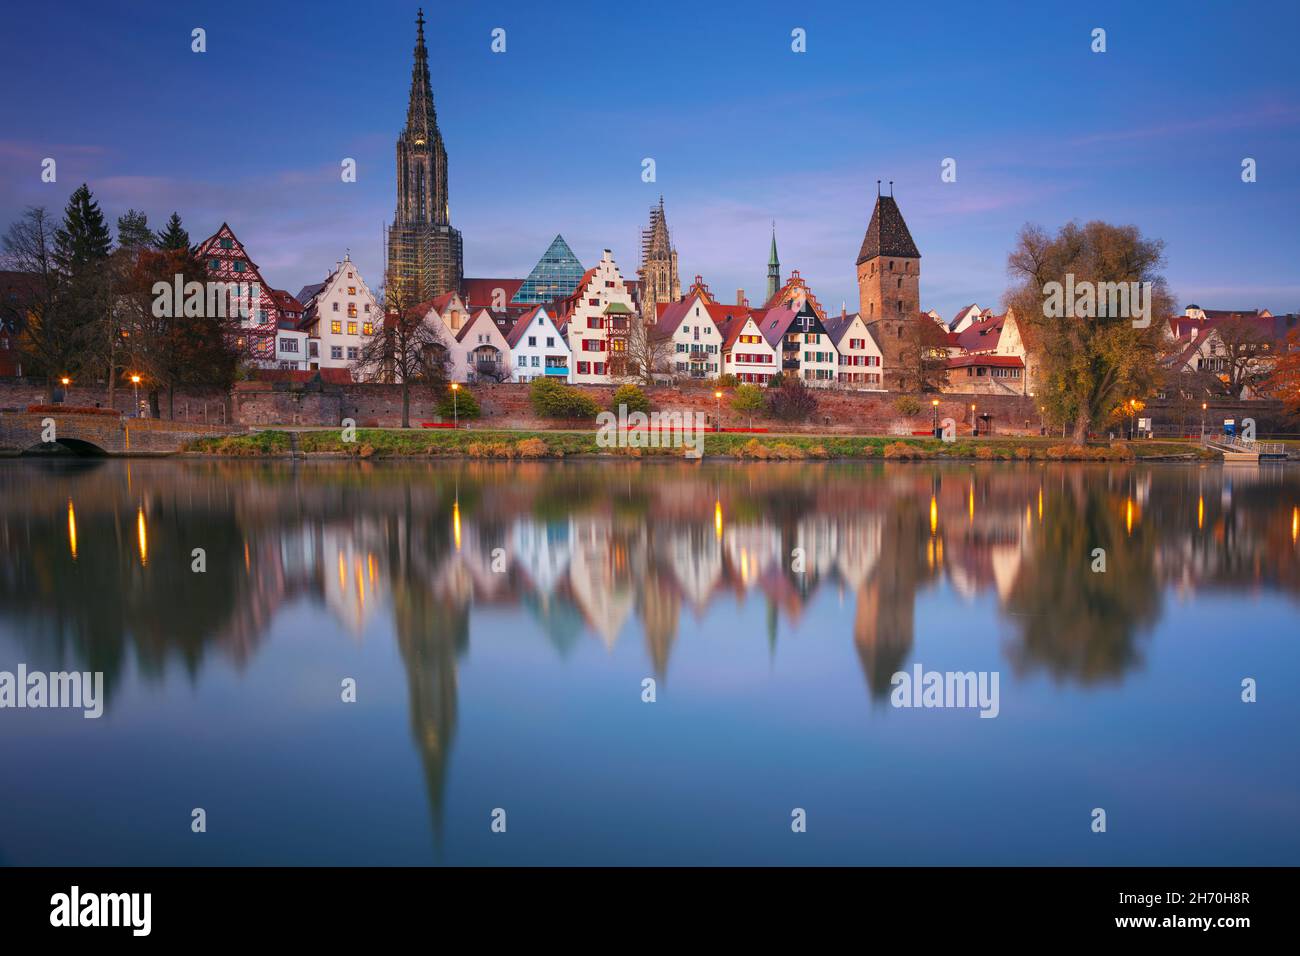 Ulm, German. Cityscape image of old town Ulm, Germany with the Ulm Minster, tallest church in the world and reflection of the city in Danube River at Stock Photo